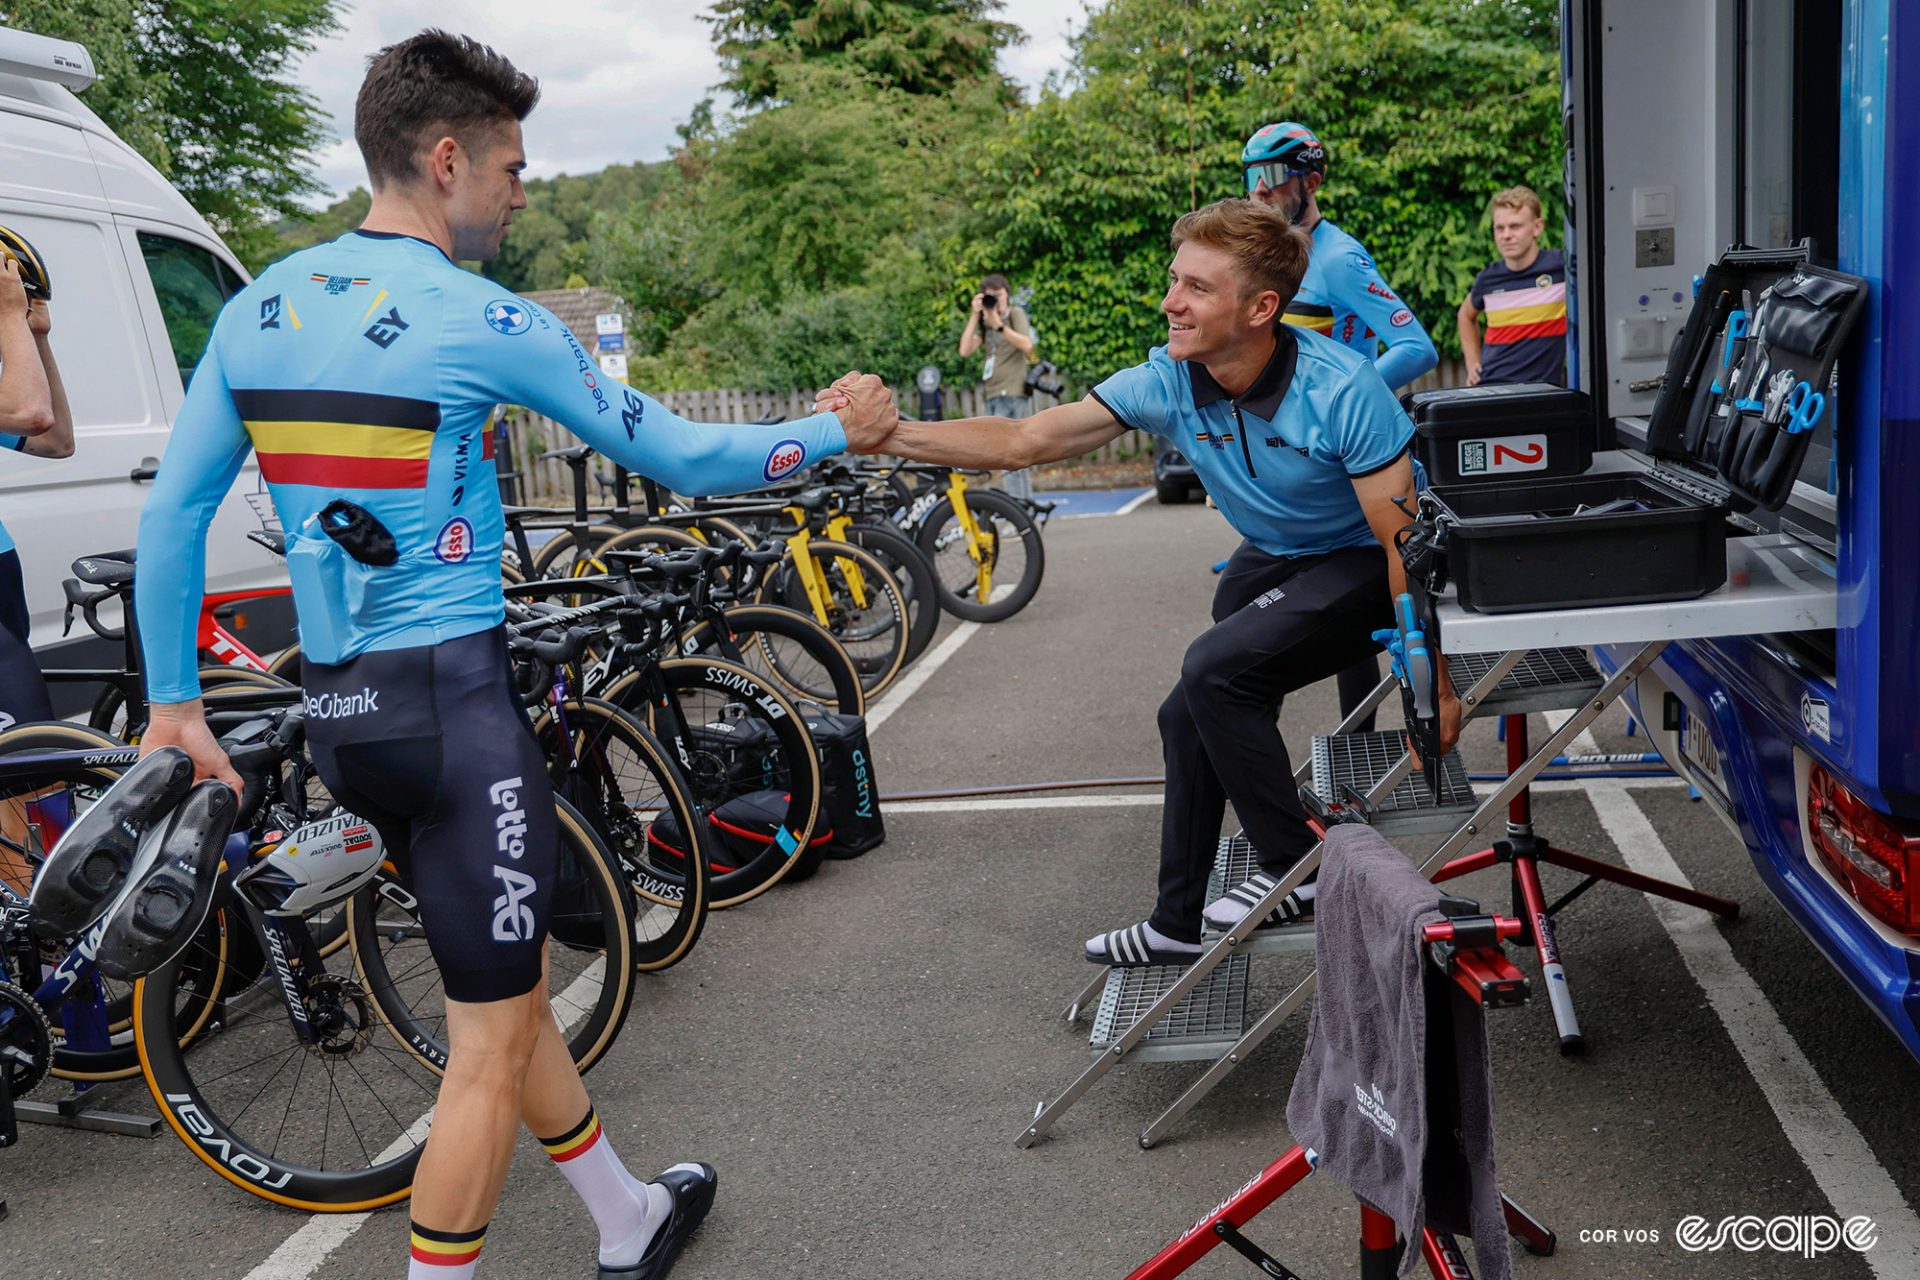 Wout van Aert engages in a hearty handshake with Remco Evenepoel during Belgian preparations for World Road Championships.